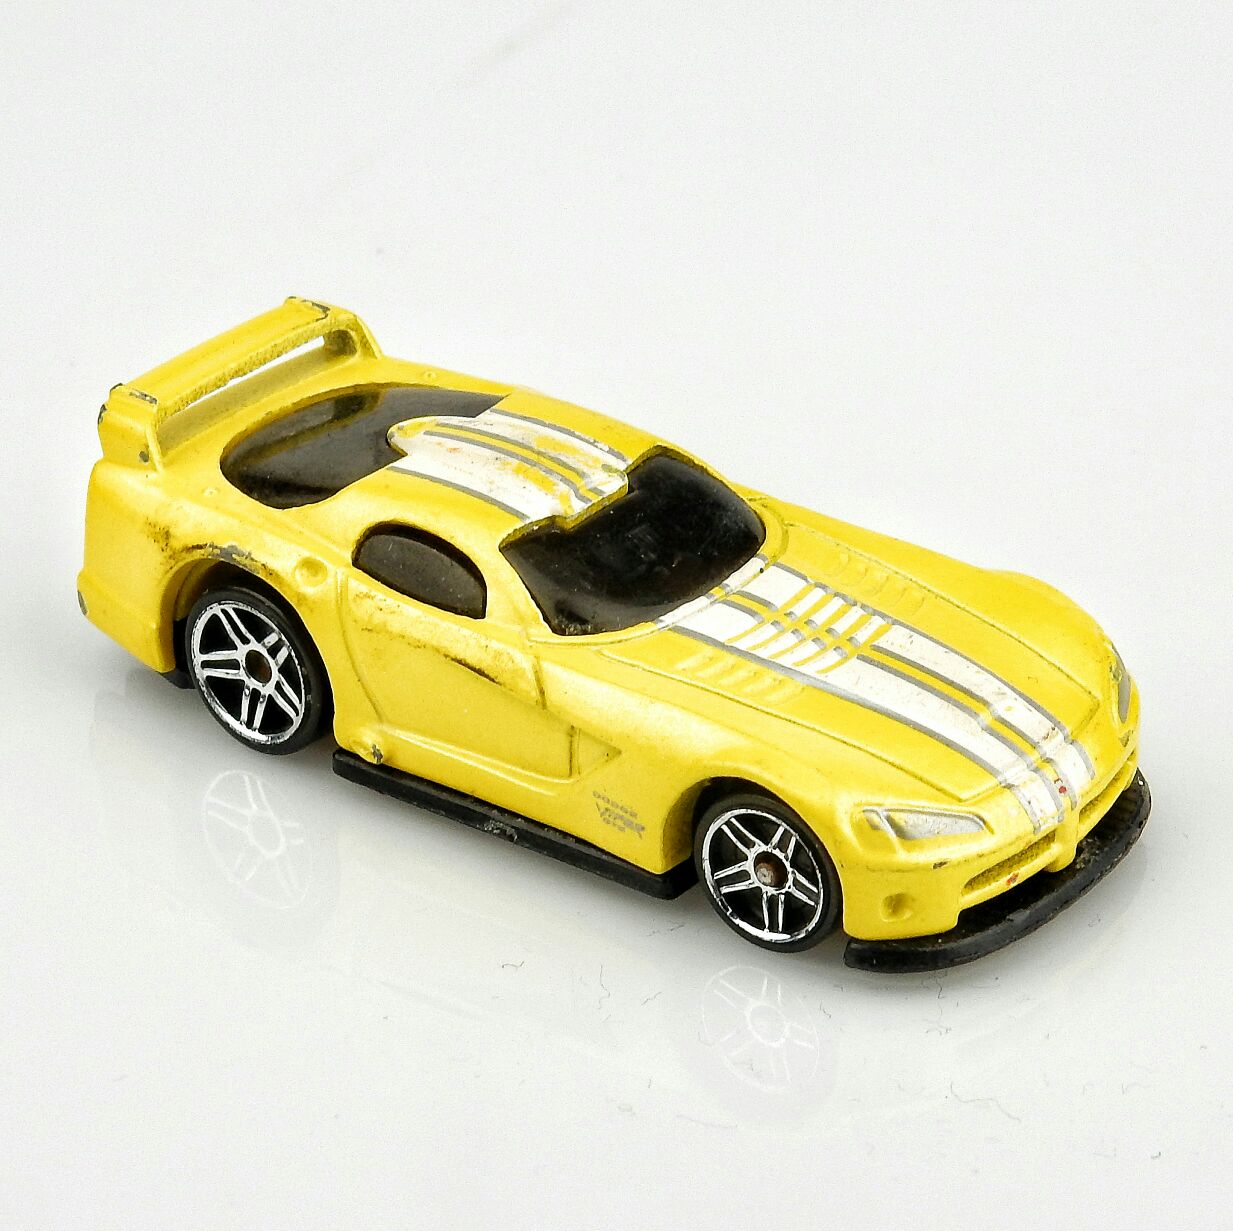 Dodge Viper GTS-R (HW) - Mopar Madness 2006 toy car collectible - Main Image 1